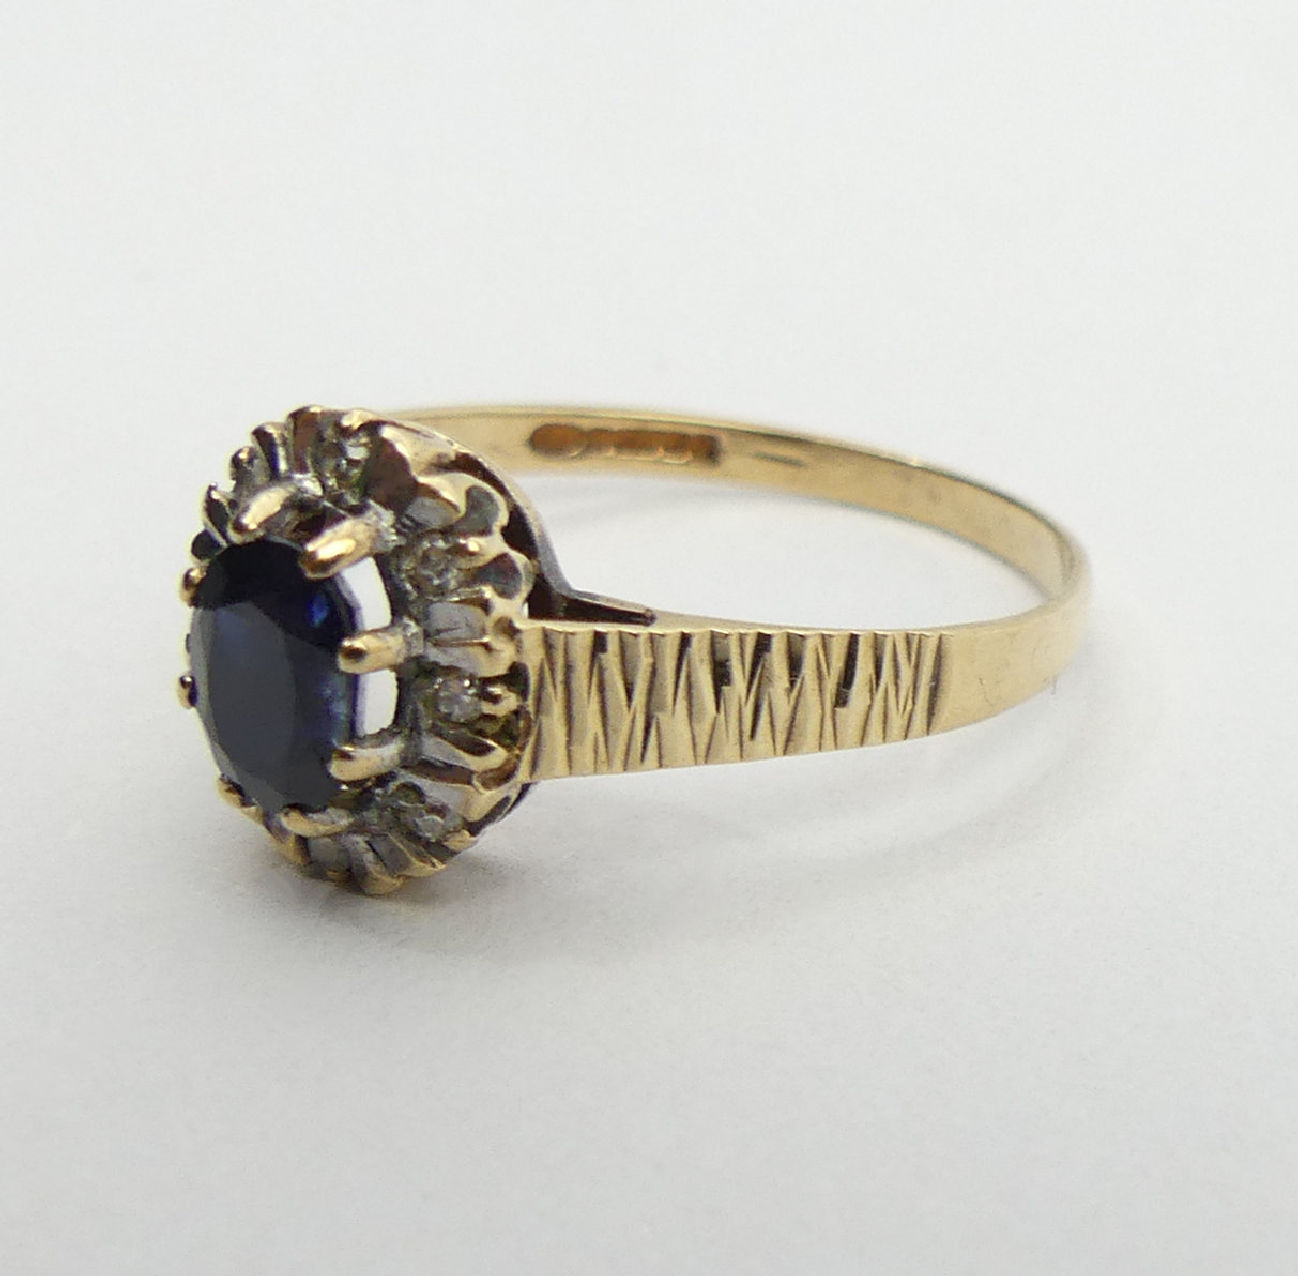 9ct gold sapphire and diamond ring, Birm. 1985, 1.8 grams, 10.2mm, size P1/2. UK postage £12. - Image 3 of 6